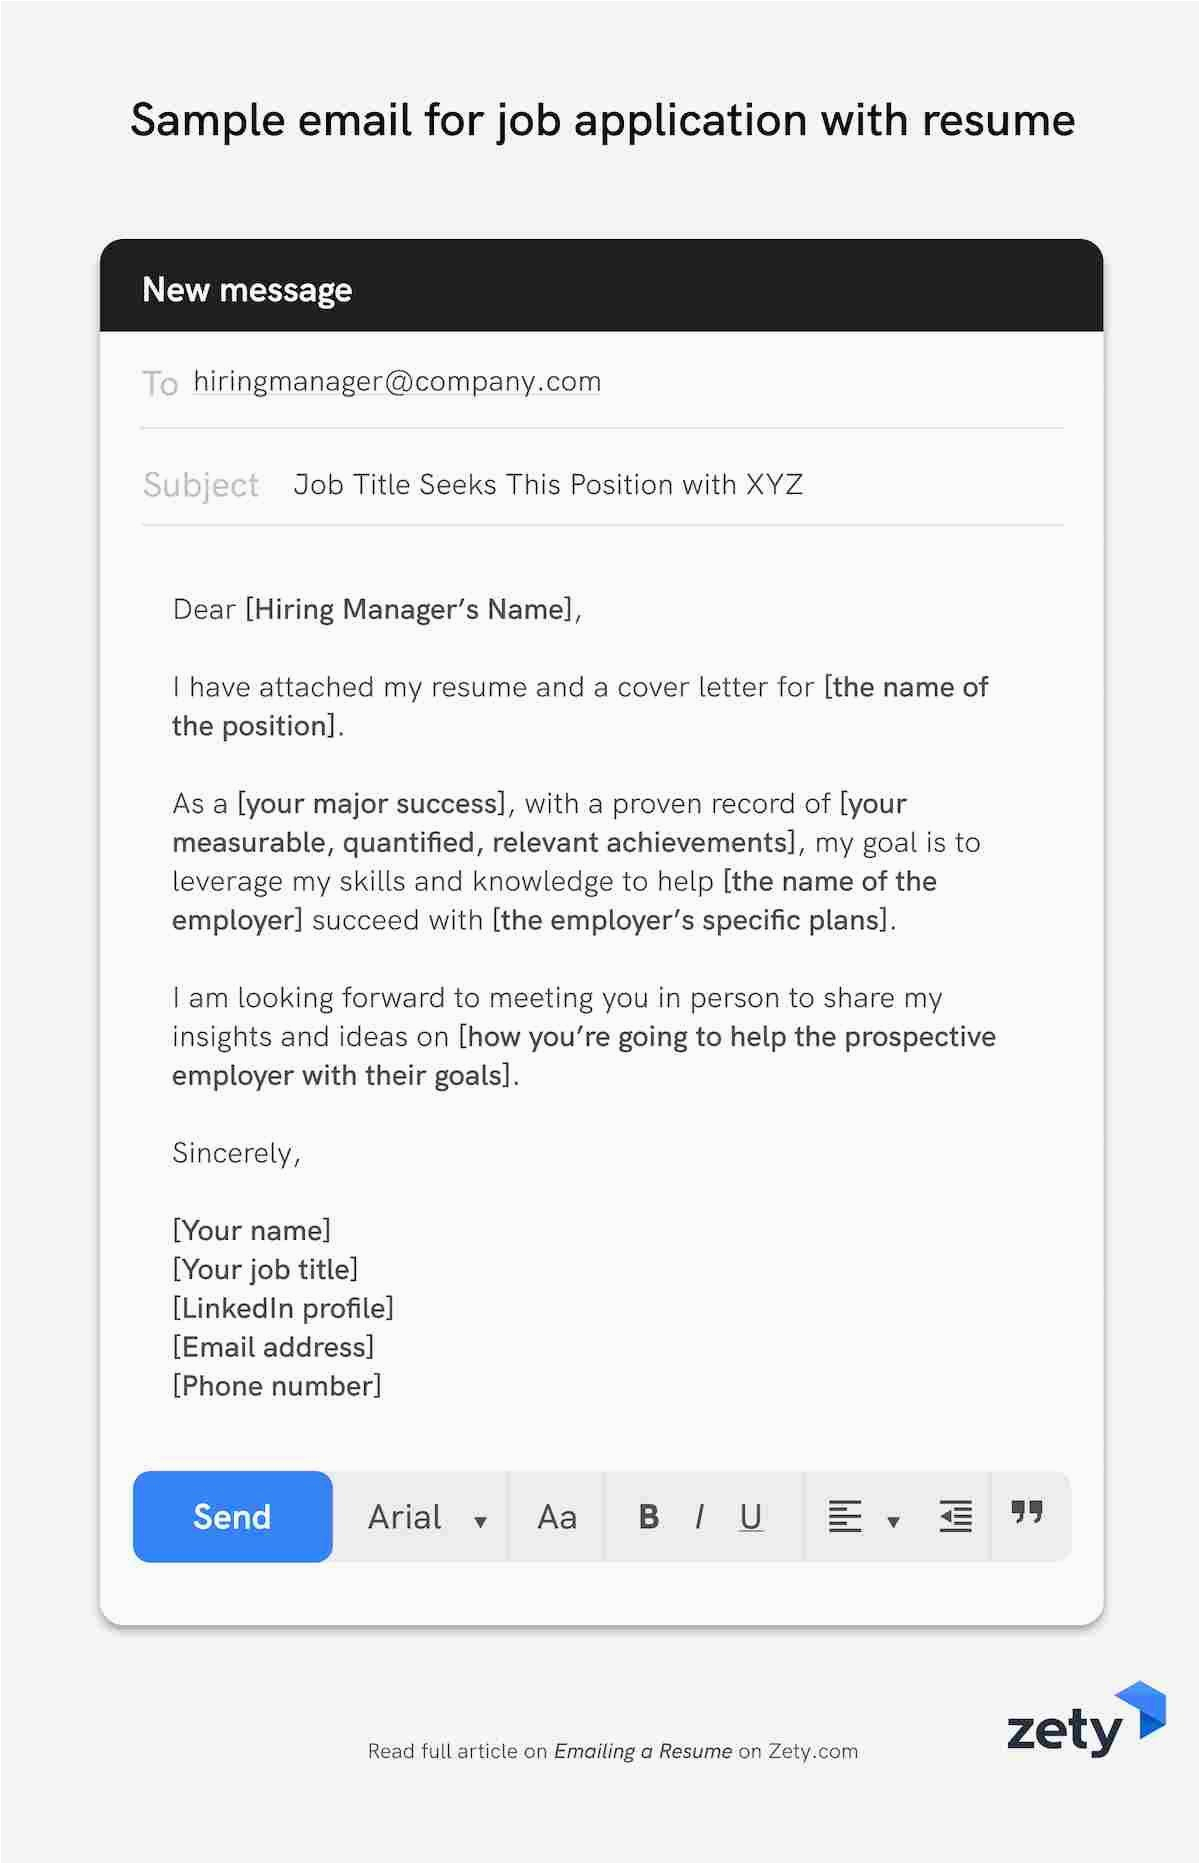 Sample Email to Potential Employer with Resume Emailing A Resume 12 Job Application Email Samples